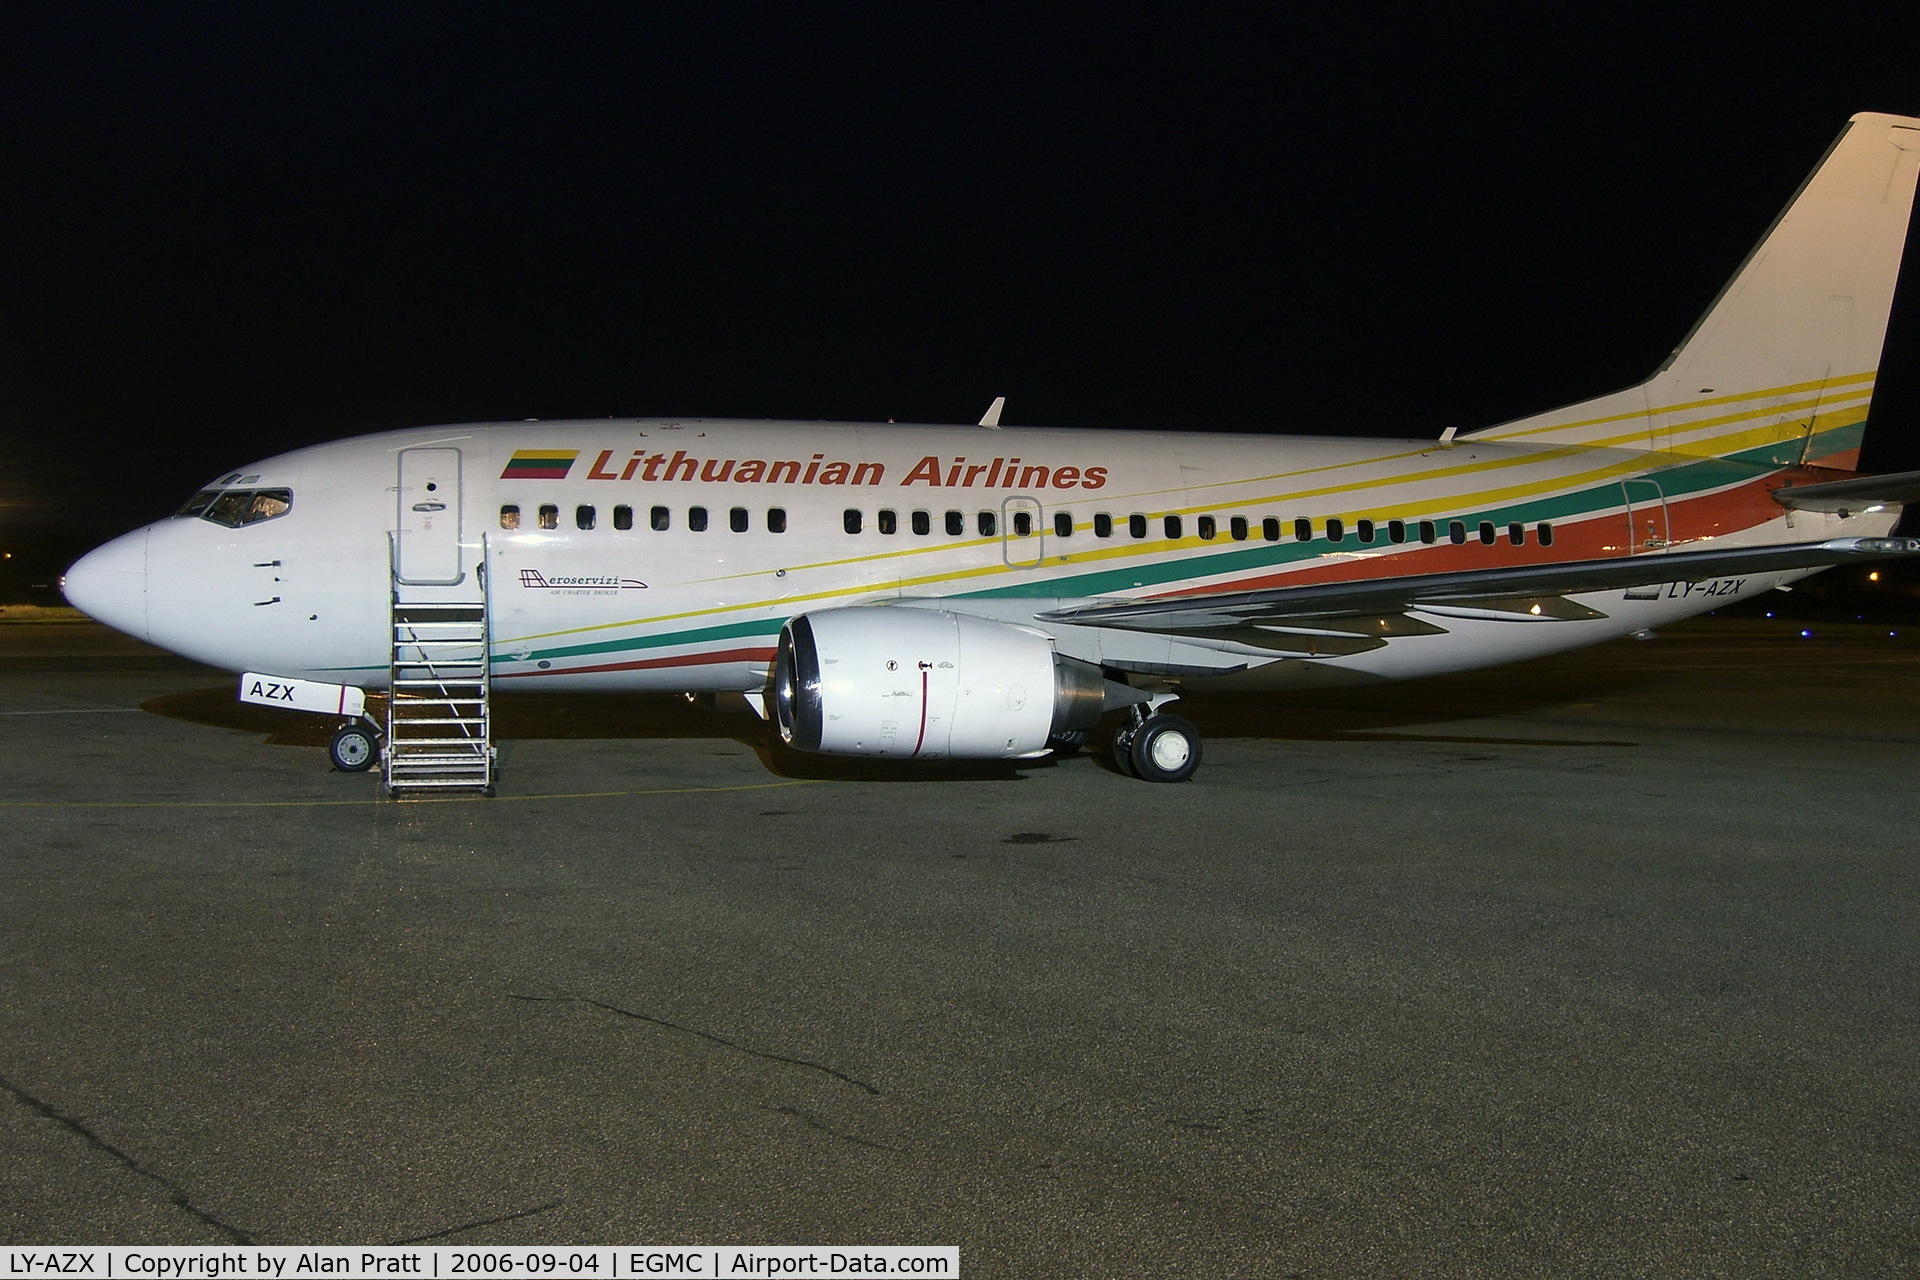 LY-AZX, 1997 Boeing 737-5Q8 C/N 28052, Night shot . Aircraft was in for maintenance.